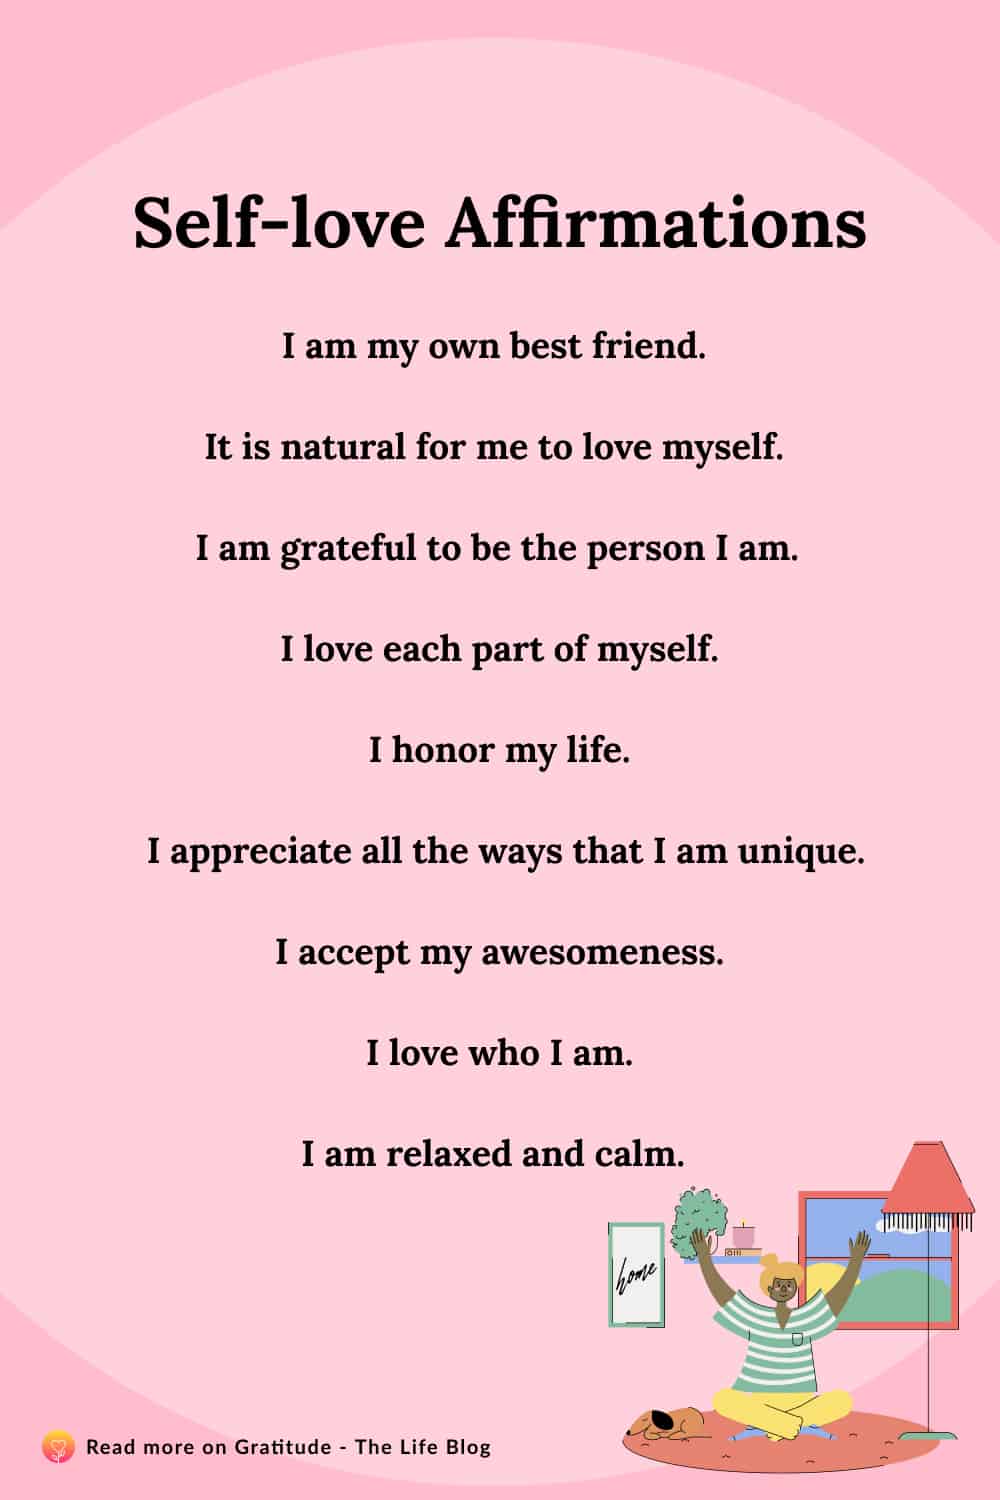 Image with list of self-love affirmations